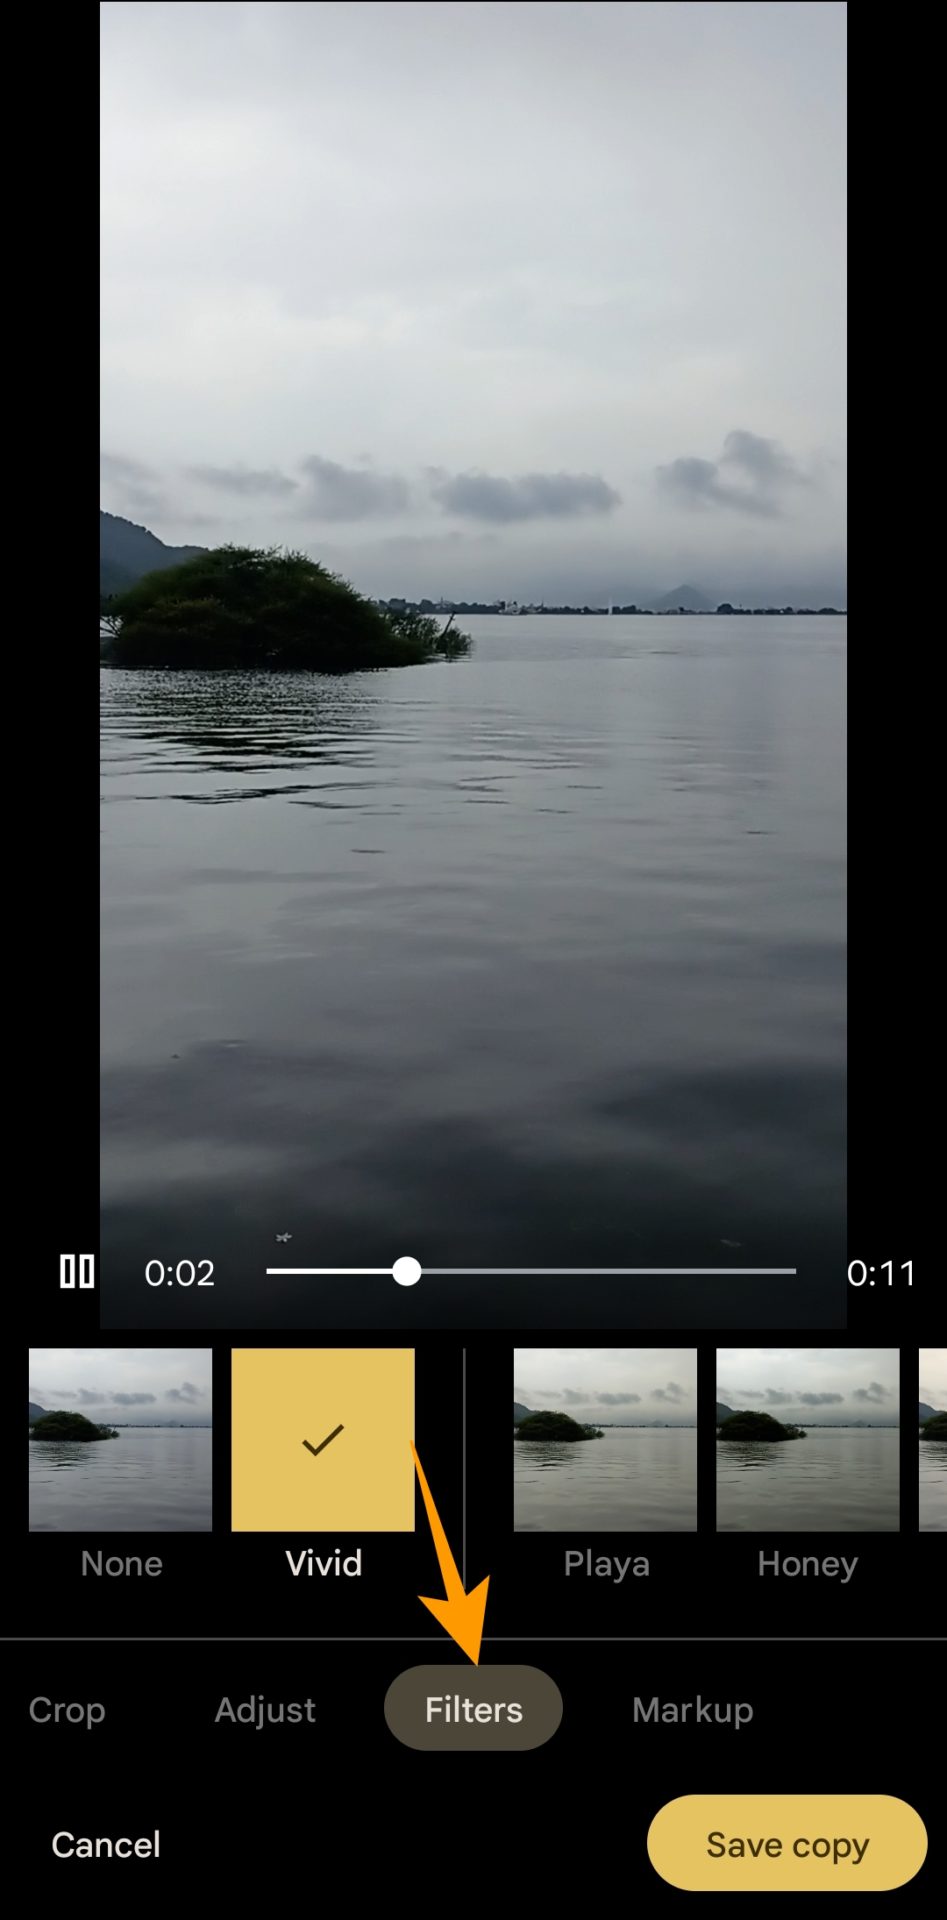 Video filters in Google Photos